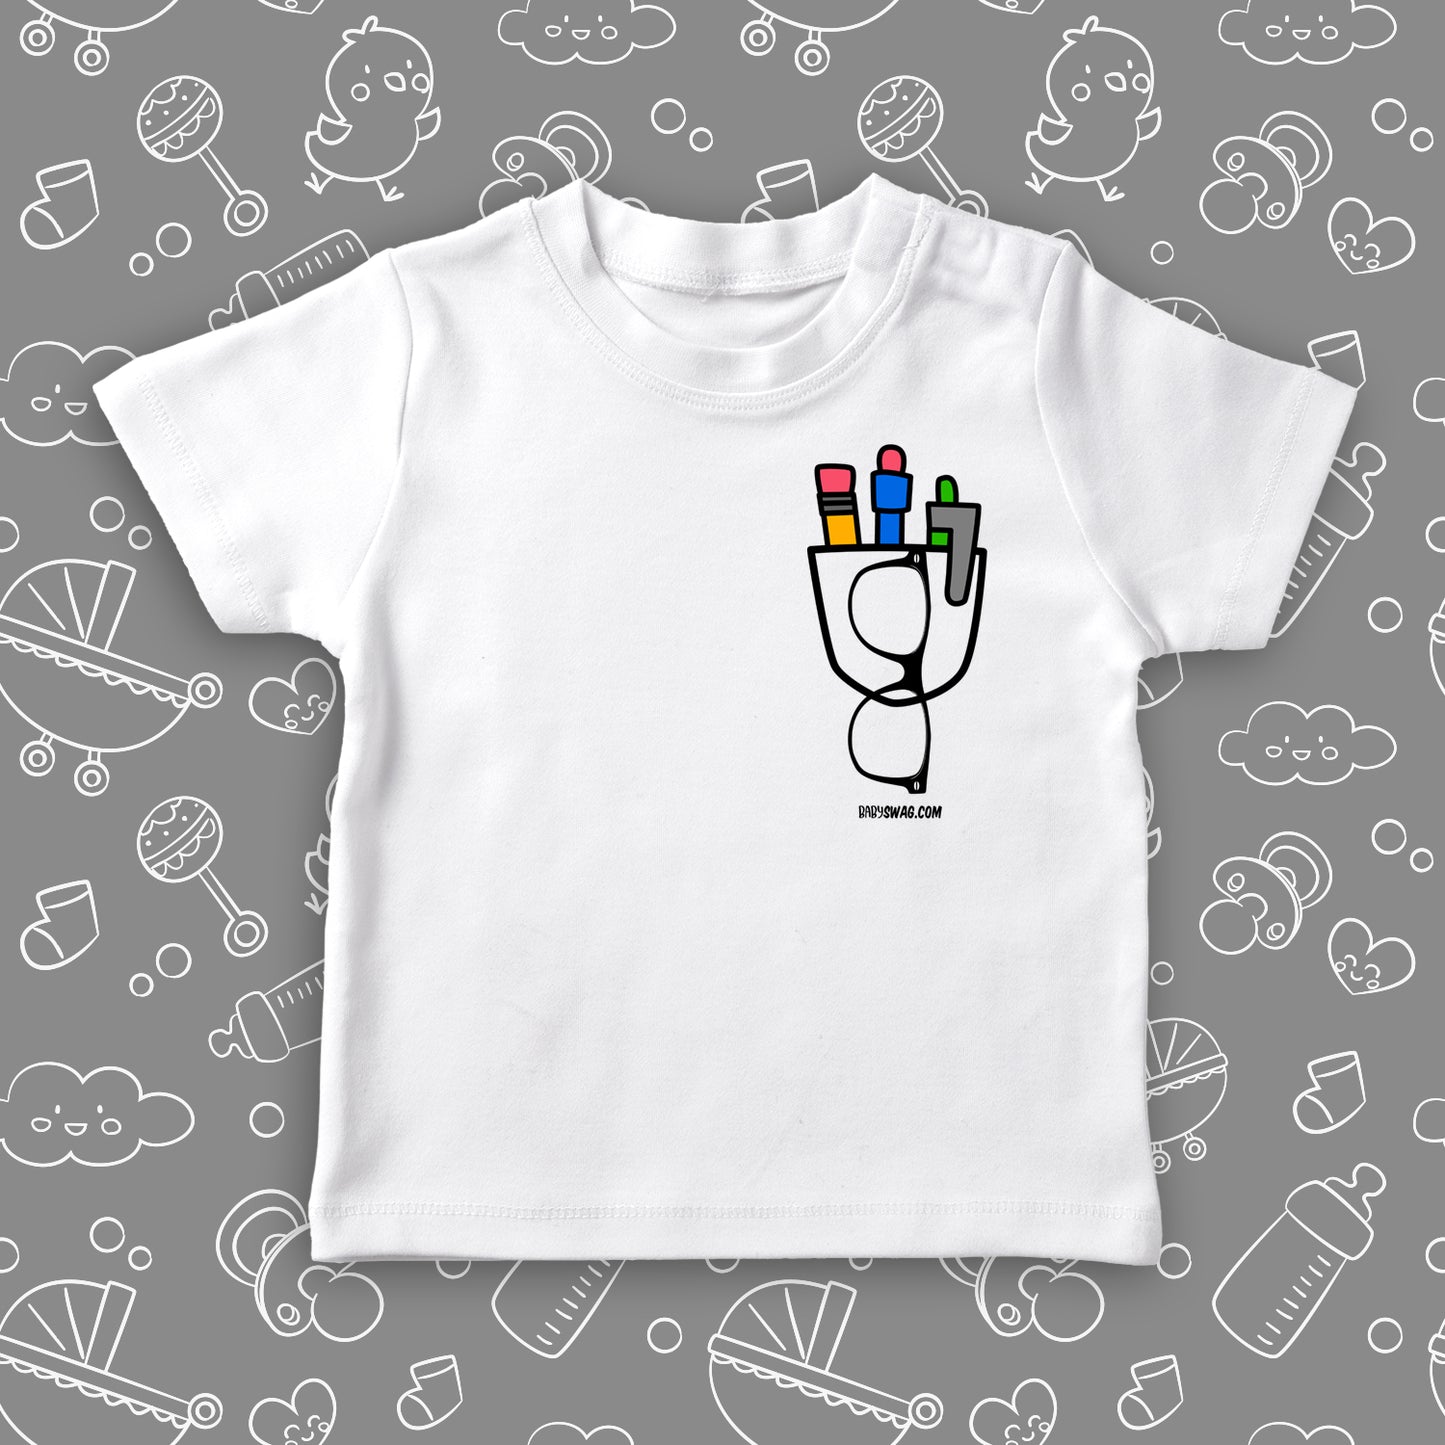 Kids learn so much while growing up. They are curious, they ask a million questions, and always want to show you what new they have learned. For our little nerdy ones, we have a super cute toddler shirt made of 100% organic cotton, so they can feel comfortable while learning about the world. 